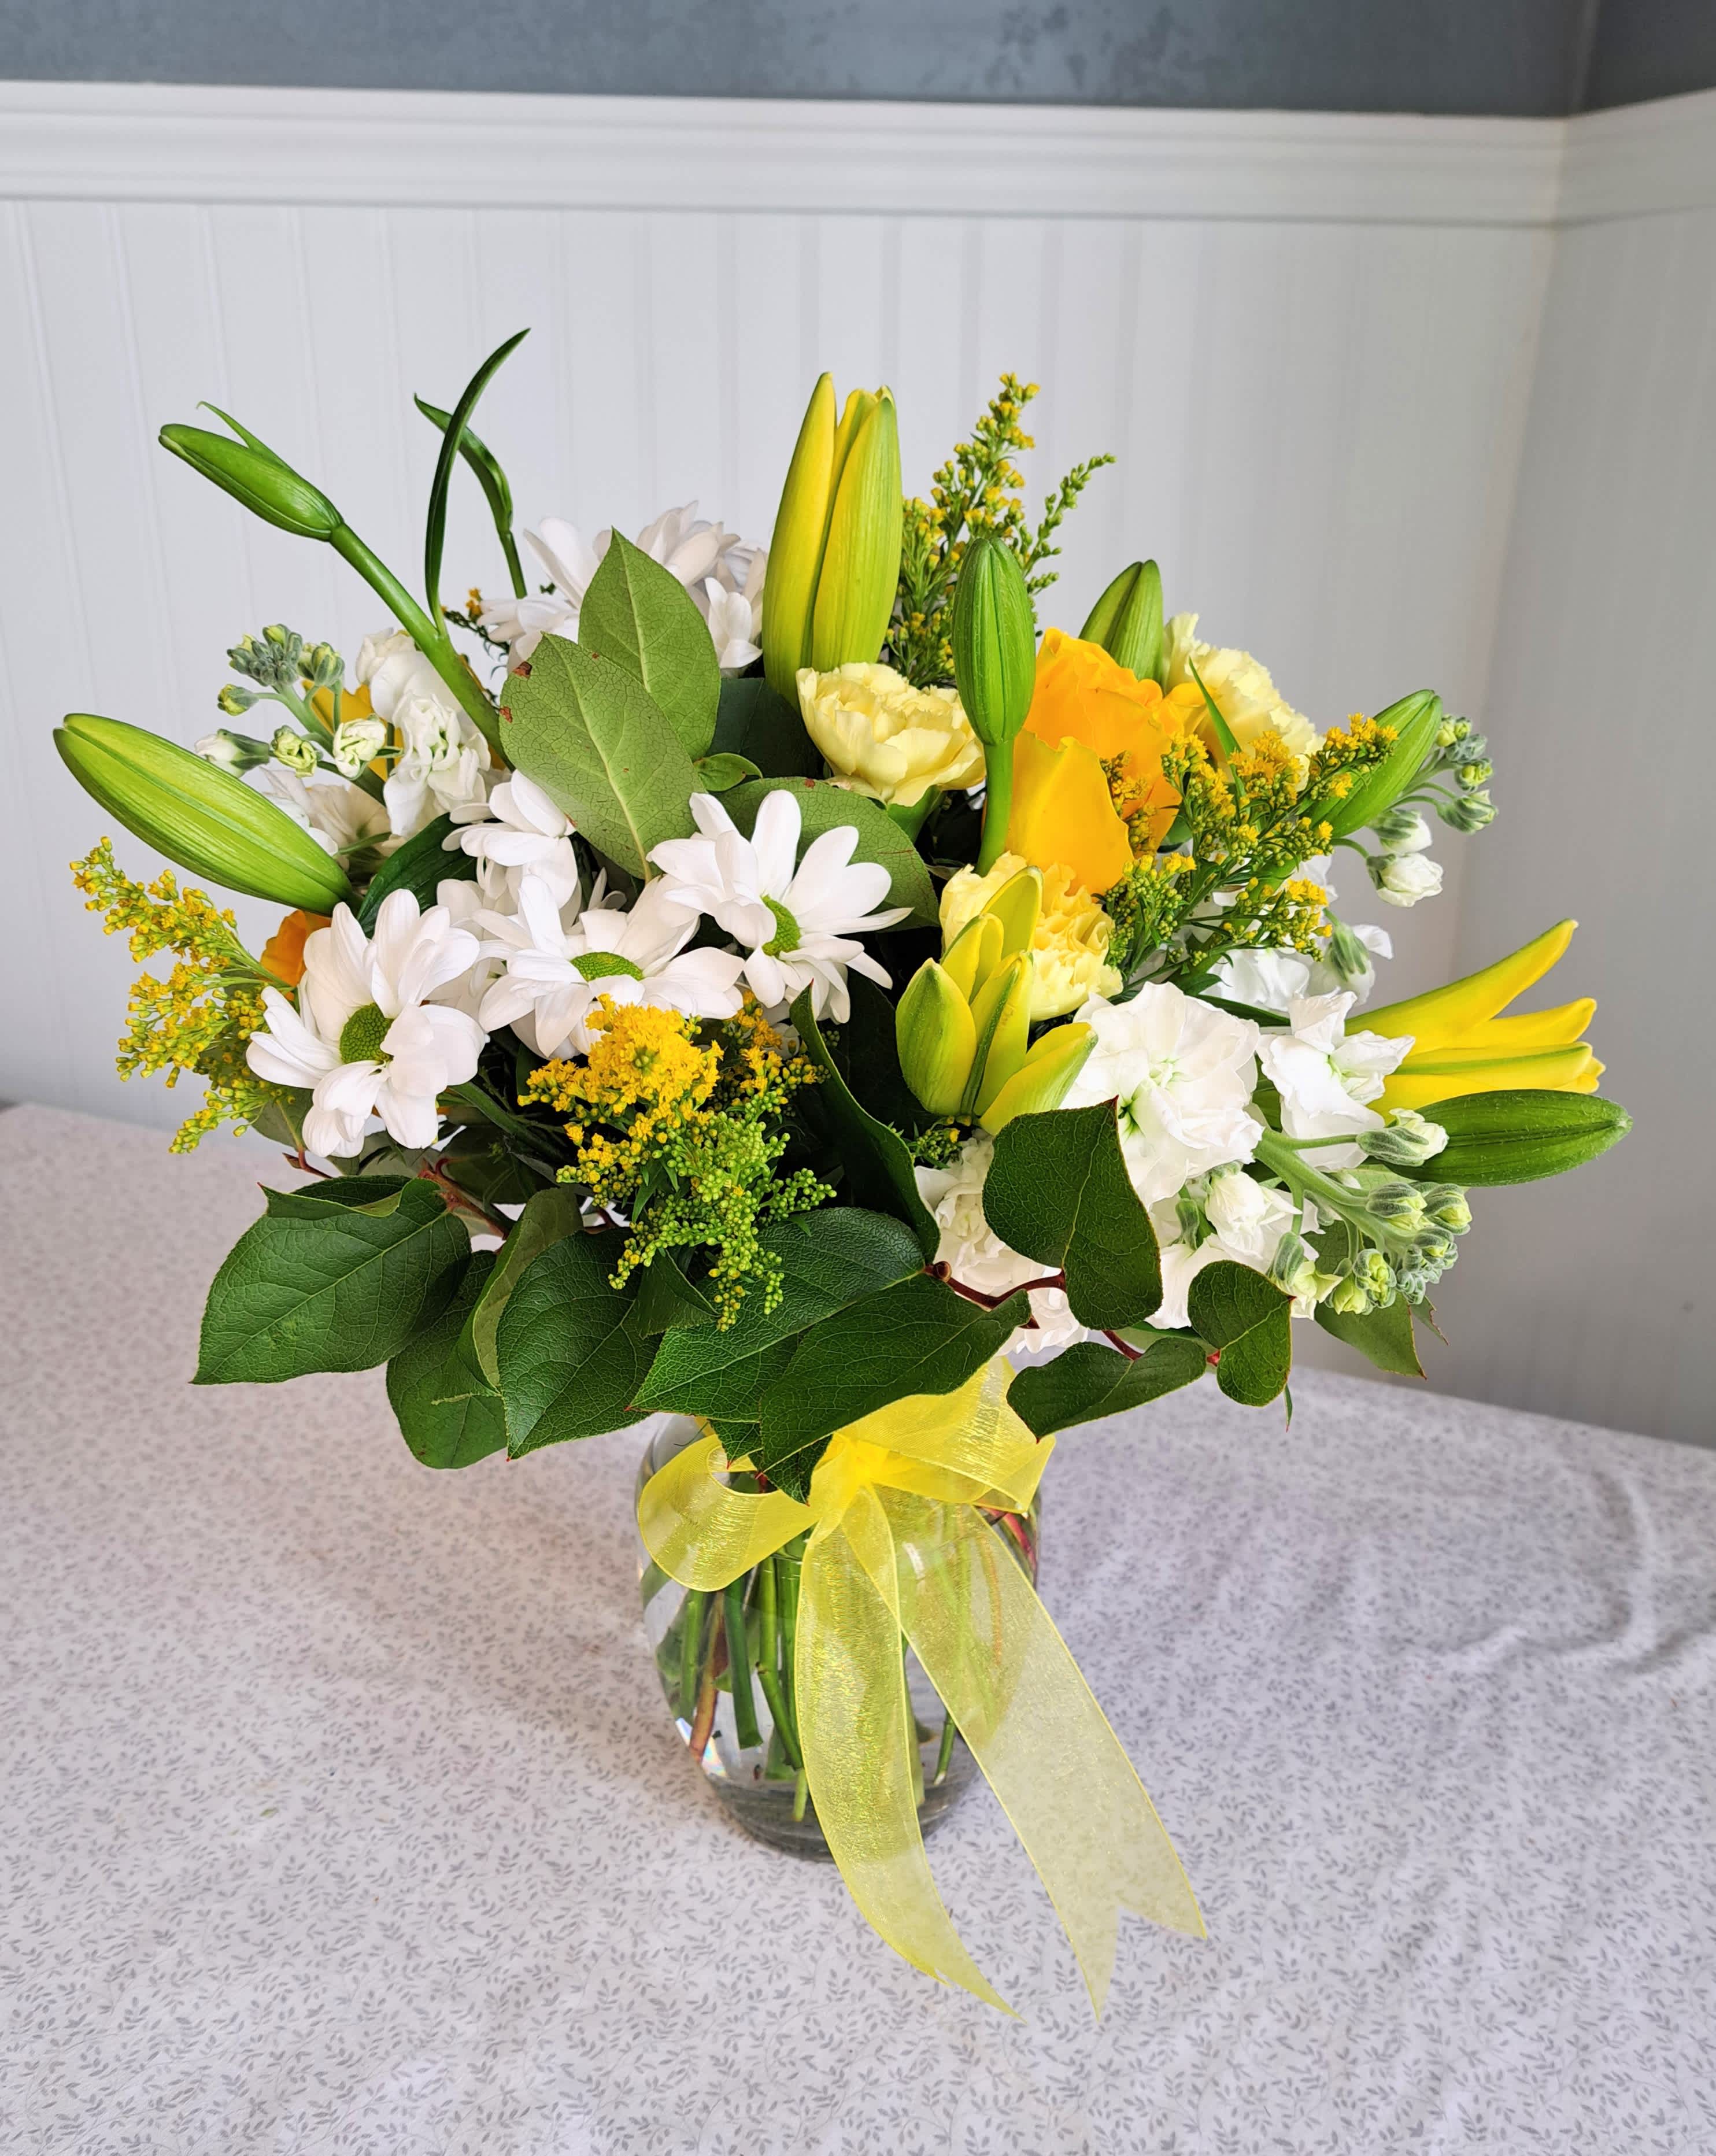 Lemonade Posy - Today is about showing someone you love and care, and how happy they make you! Tell your loved one you love them with this Lemonade Posy bouquet filled with bright and cheerful blooms that symbolize love, happiness, positivity, and loyalty.